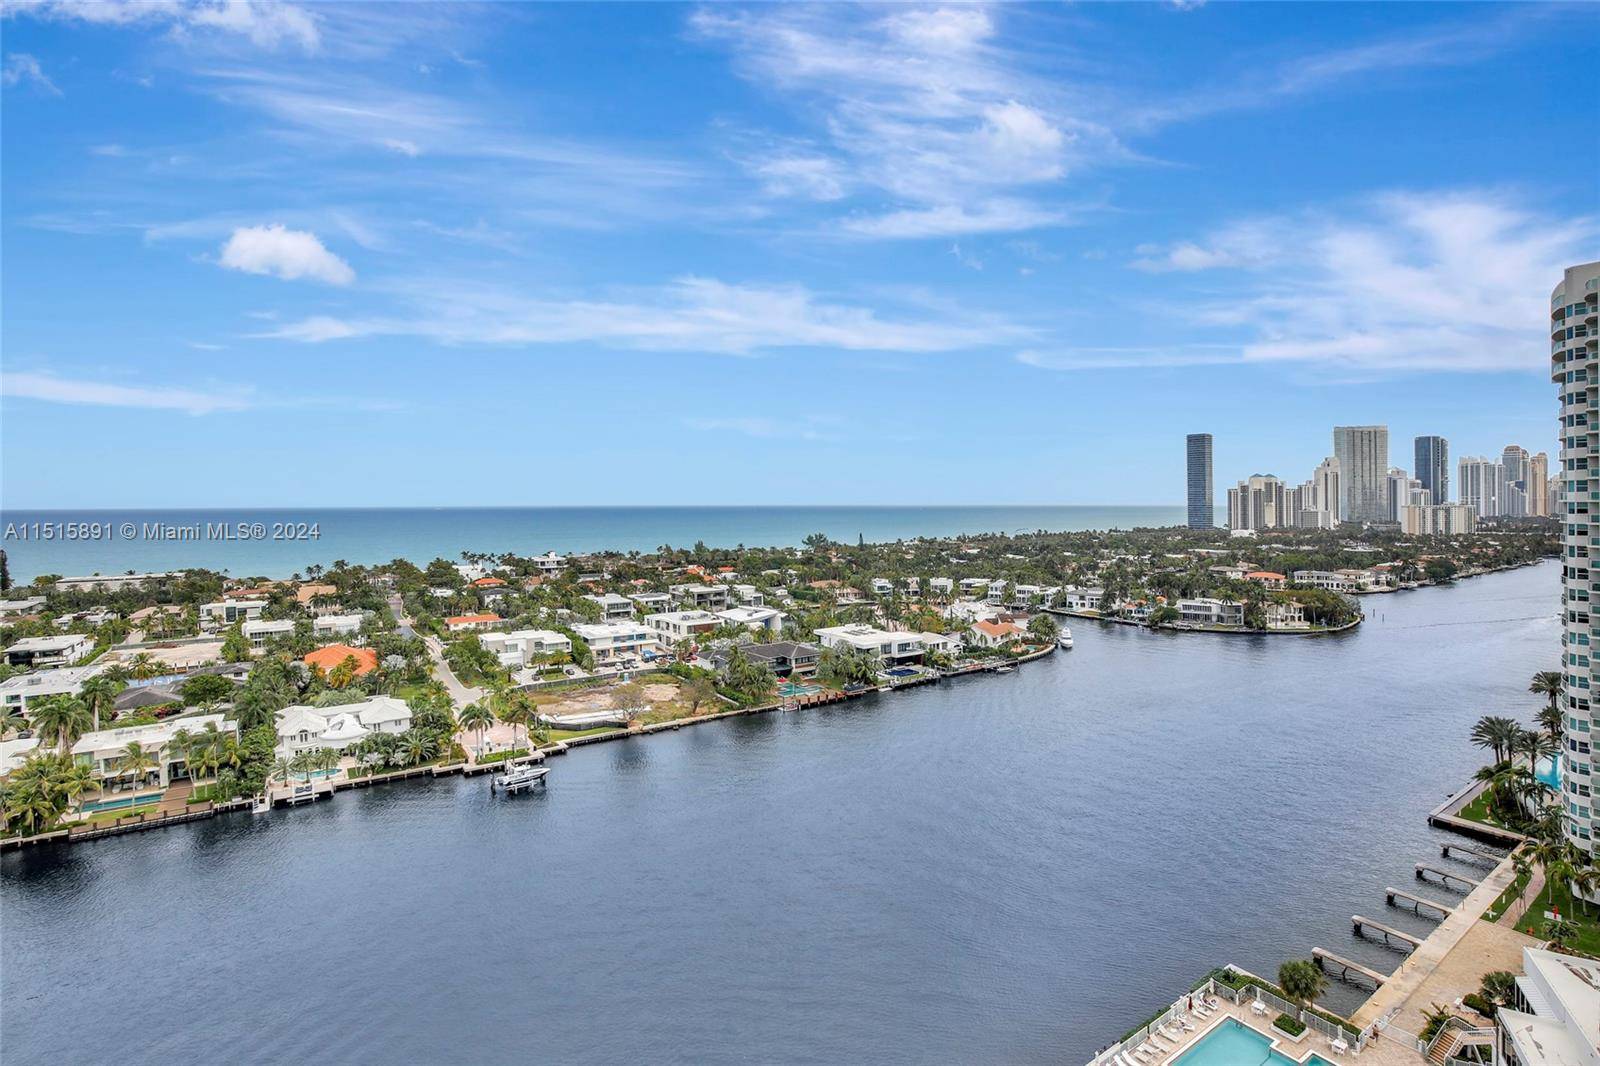 SPECTACULAR DIRECT OCEAN AND INTRACOASTAL VIEWS FROM EVERY ROOM COMPLETELY RENOVATED IMPACT FLOOR TO CEILING WINDOWS AND SLIDING DOORS PROTECT FROM STORMS AND LET PLENTY OF LIGHT INSIDE WASHER DRYER ...